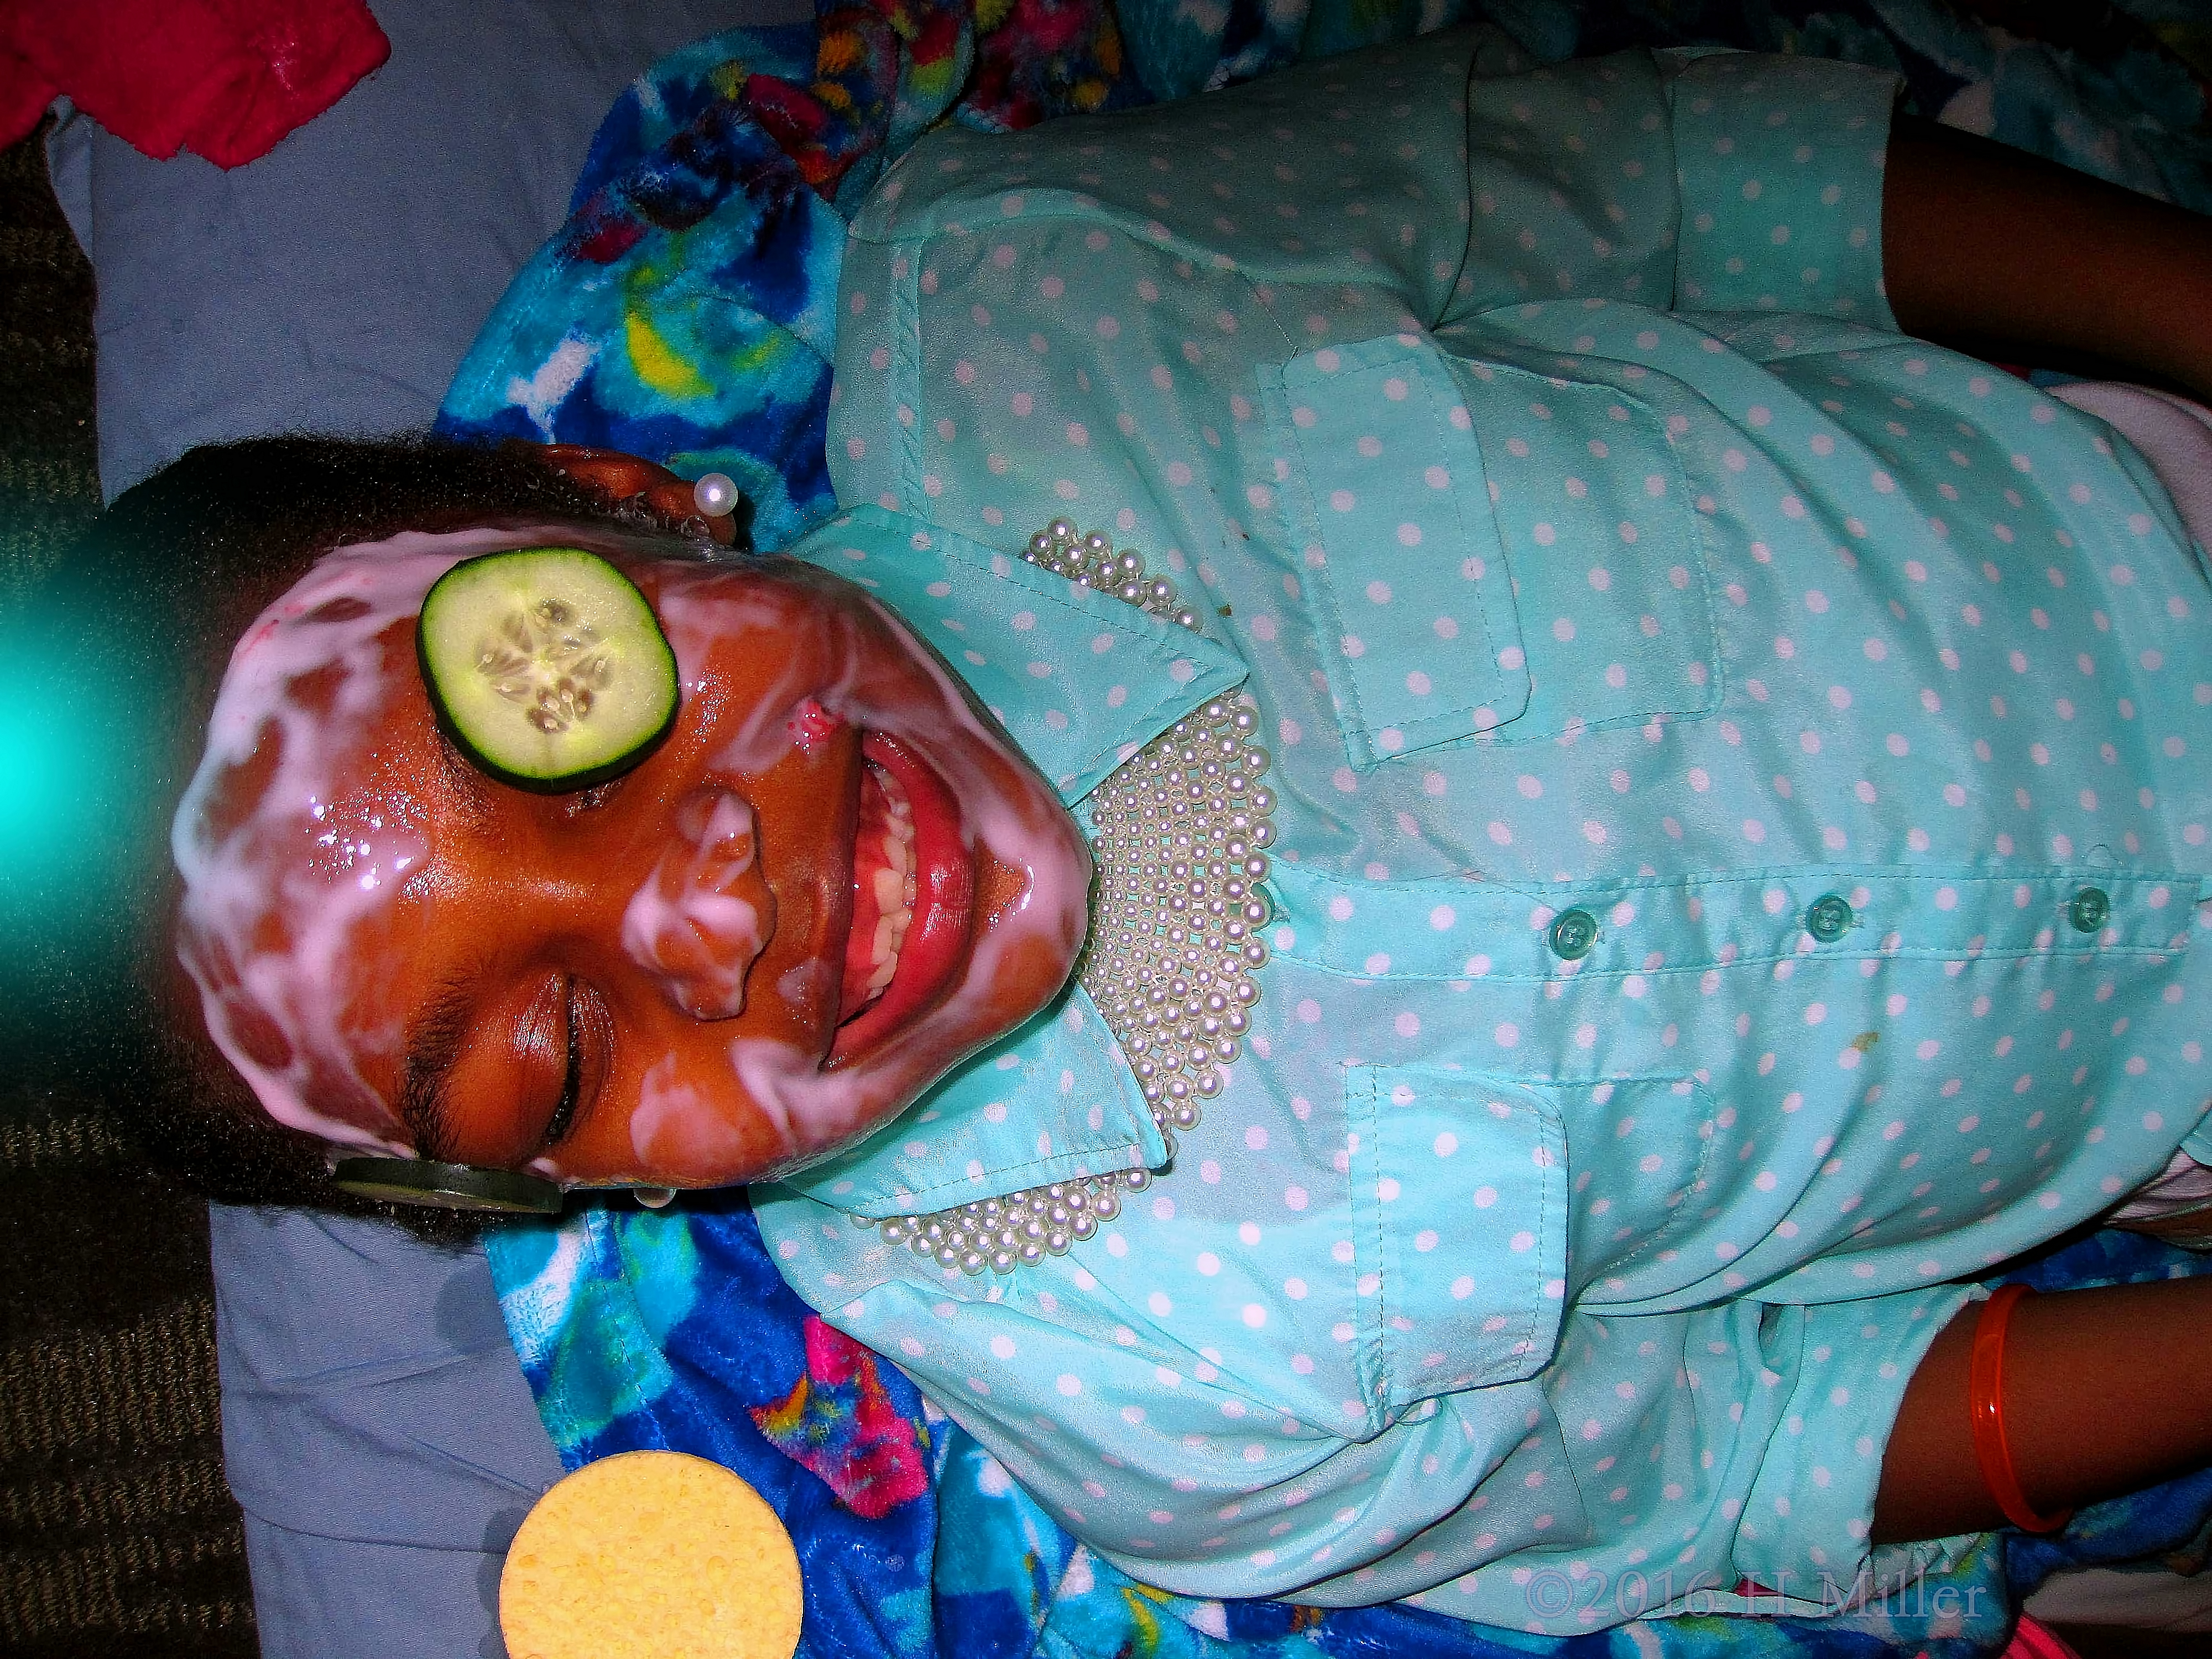 Her Cuke Keeps Slipping Off Making Her Laugh During Her Kids Facial. 